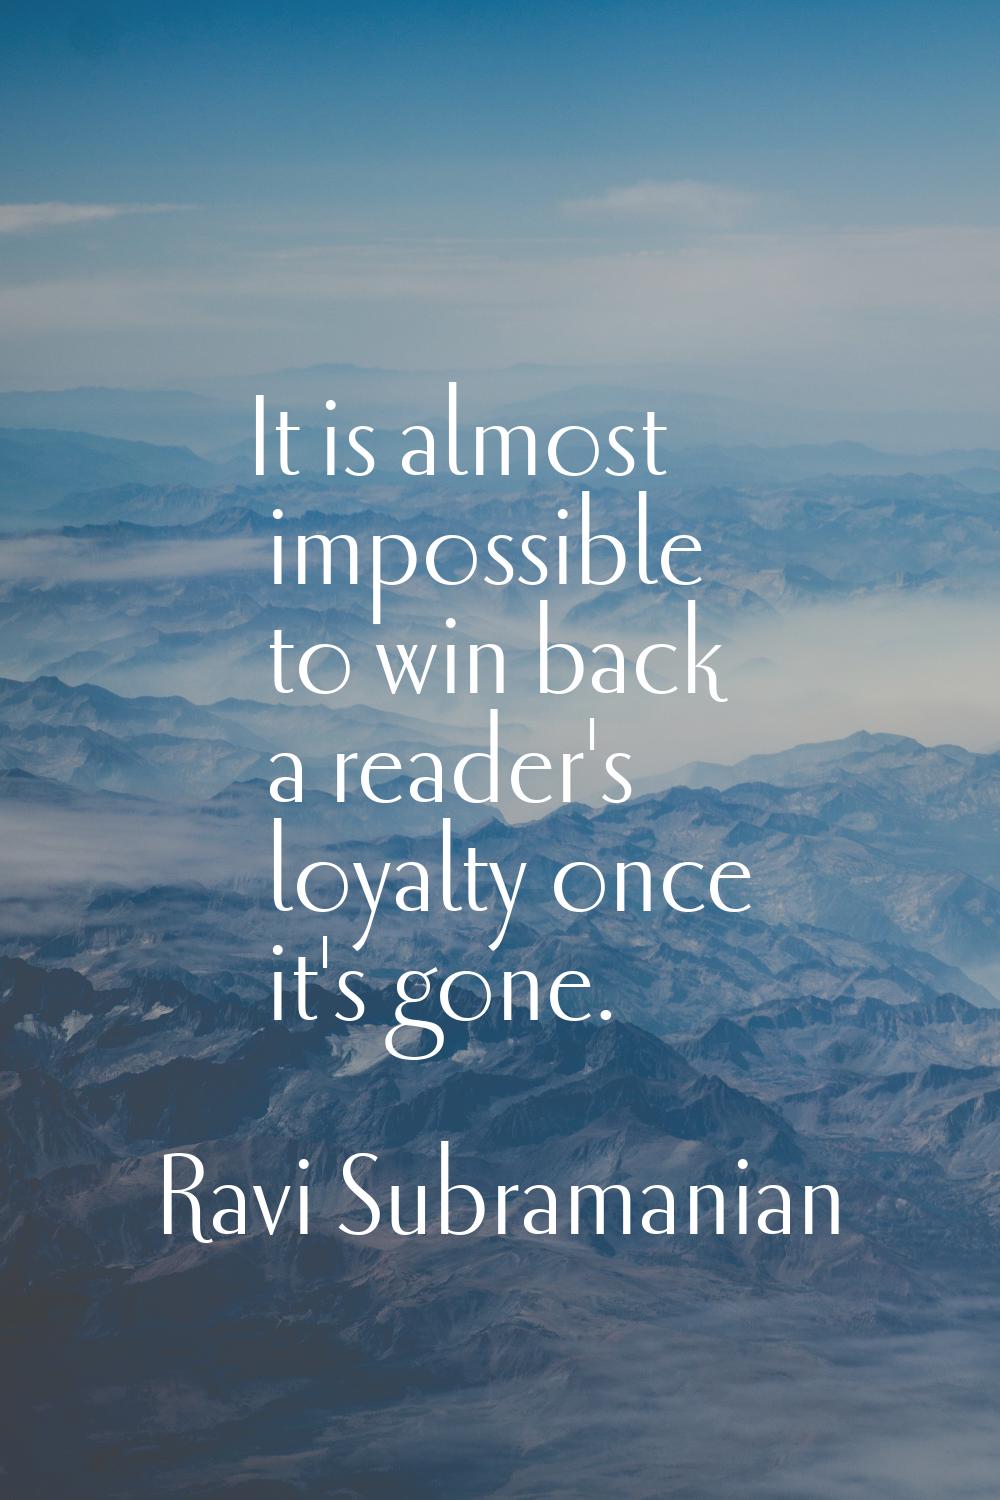 It is almost impossible to win back a reader's loyalty once it's gone.